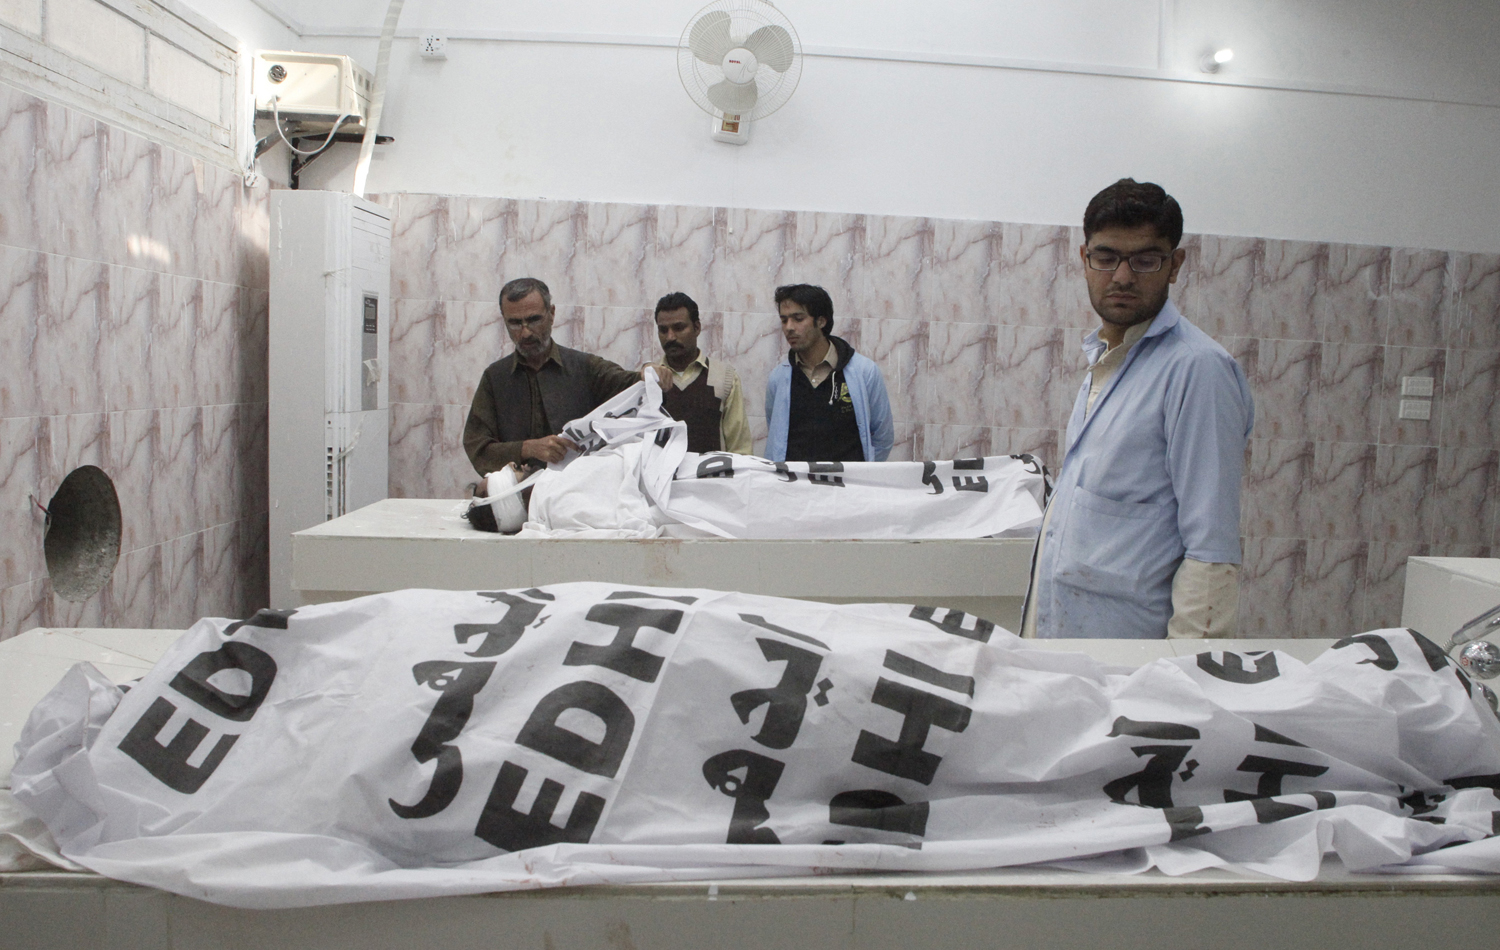 Hospital staff stand near the bodies of anti-polio drive campaign workers who were shot by gunmen, at a hospital morgue in Quetta